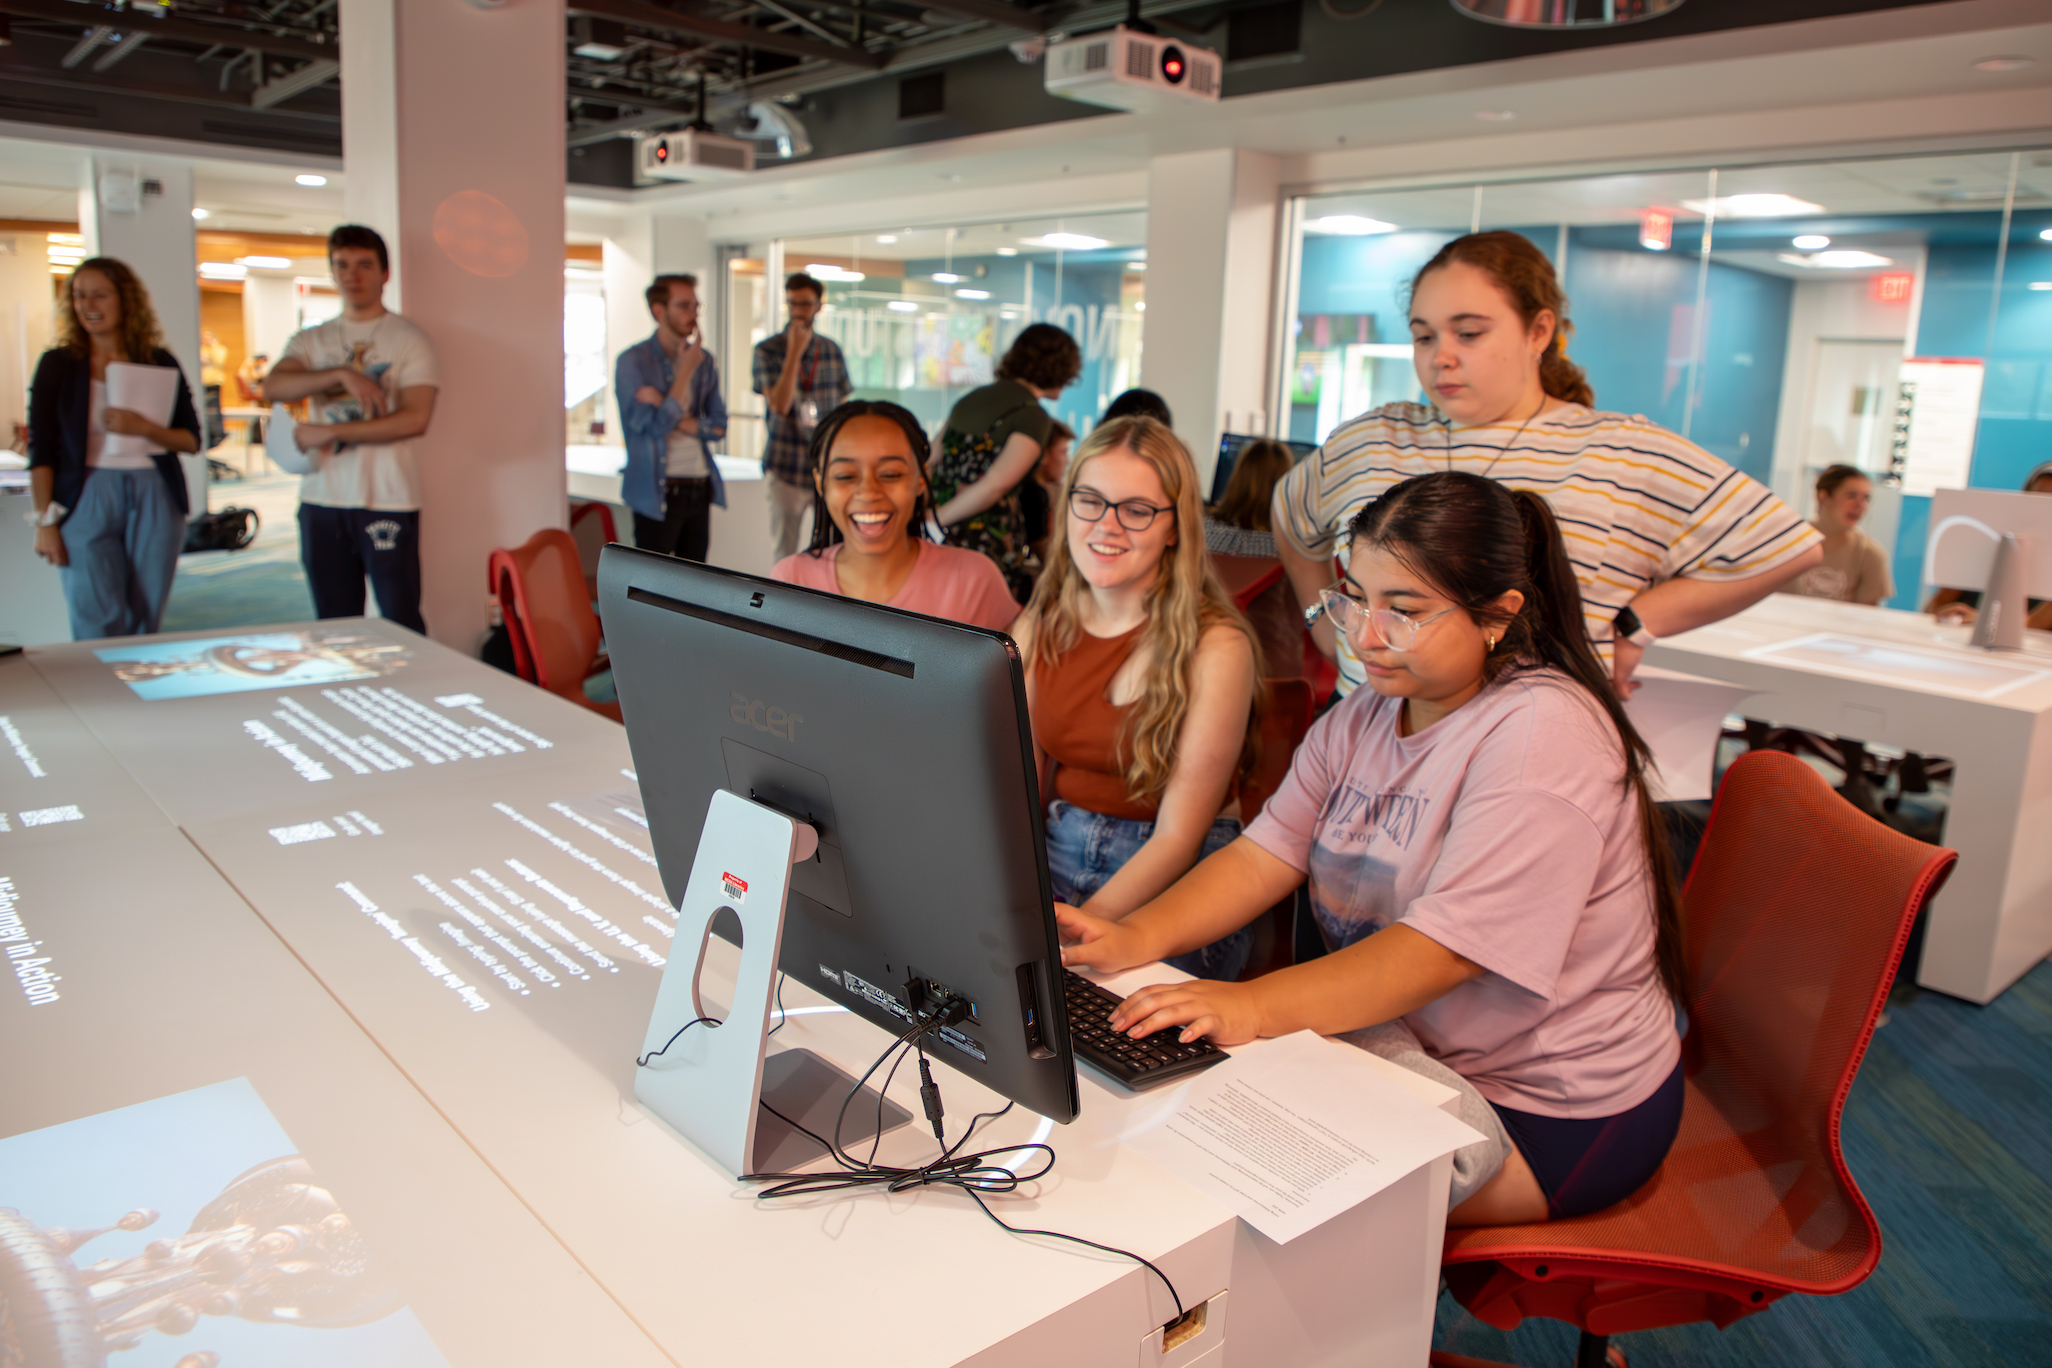 Four students sit at a computer in the Innovation Studio, smiling and laughing. Informative text and images are displayed on the table around the computer.